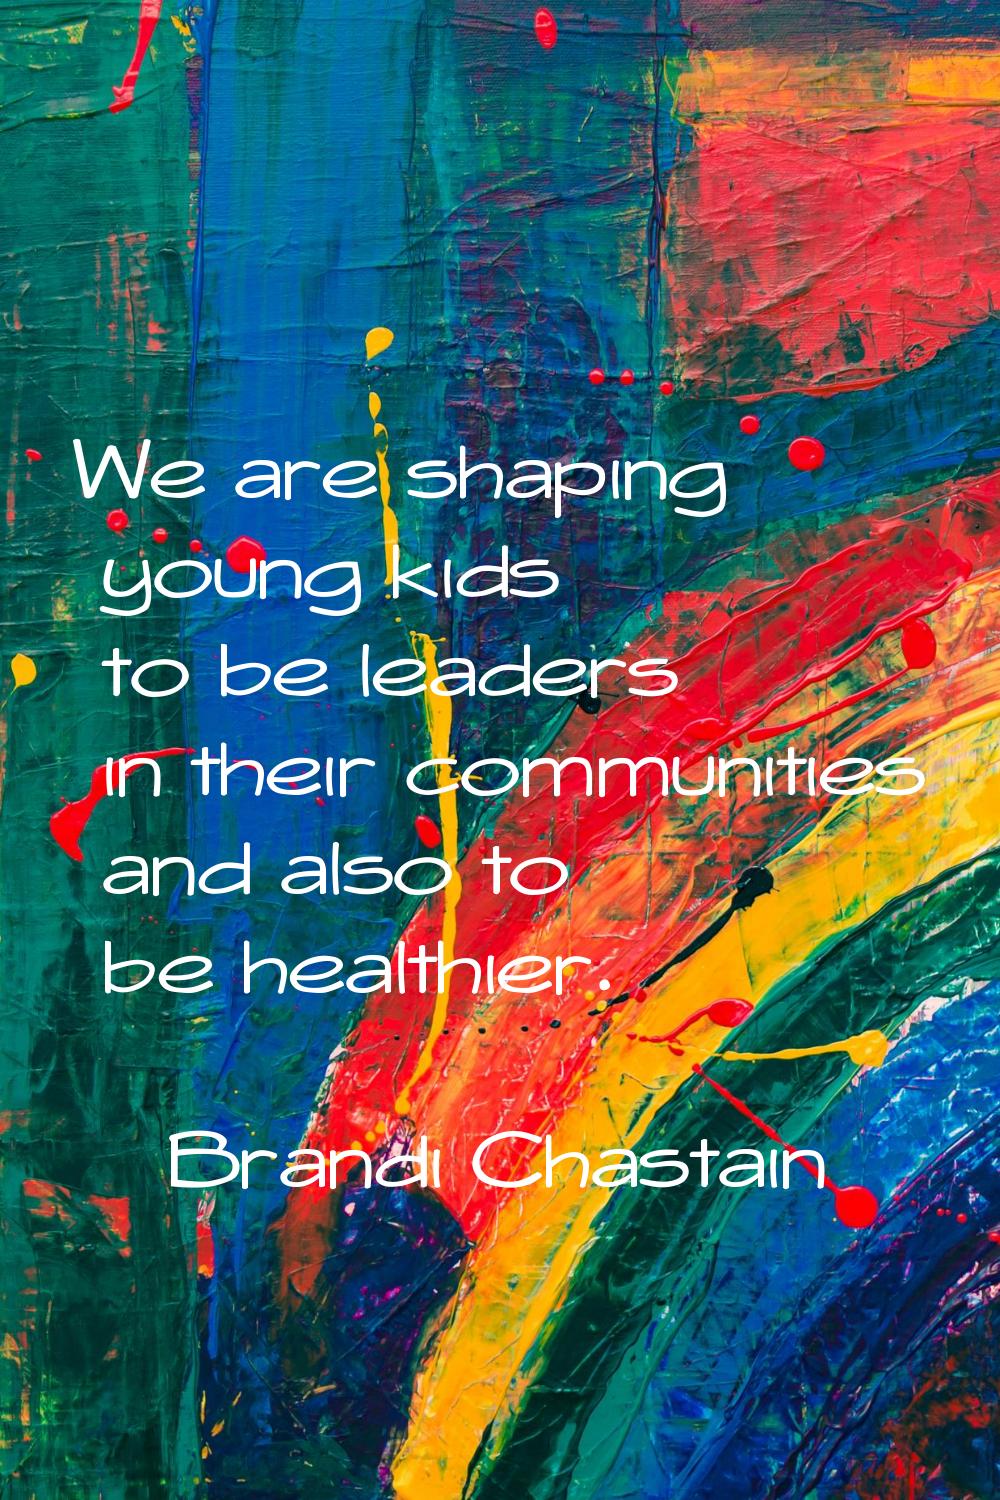 We are shaping young kids to be leaders in their communities and also to be healthier.